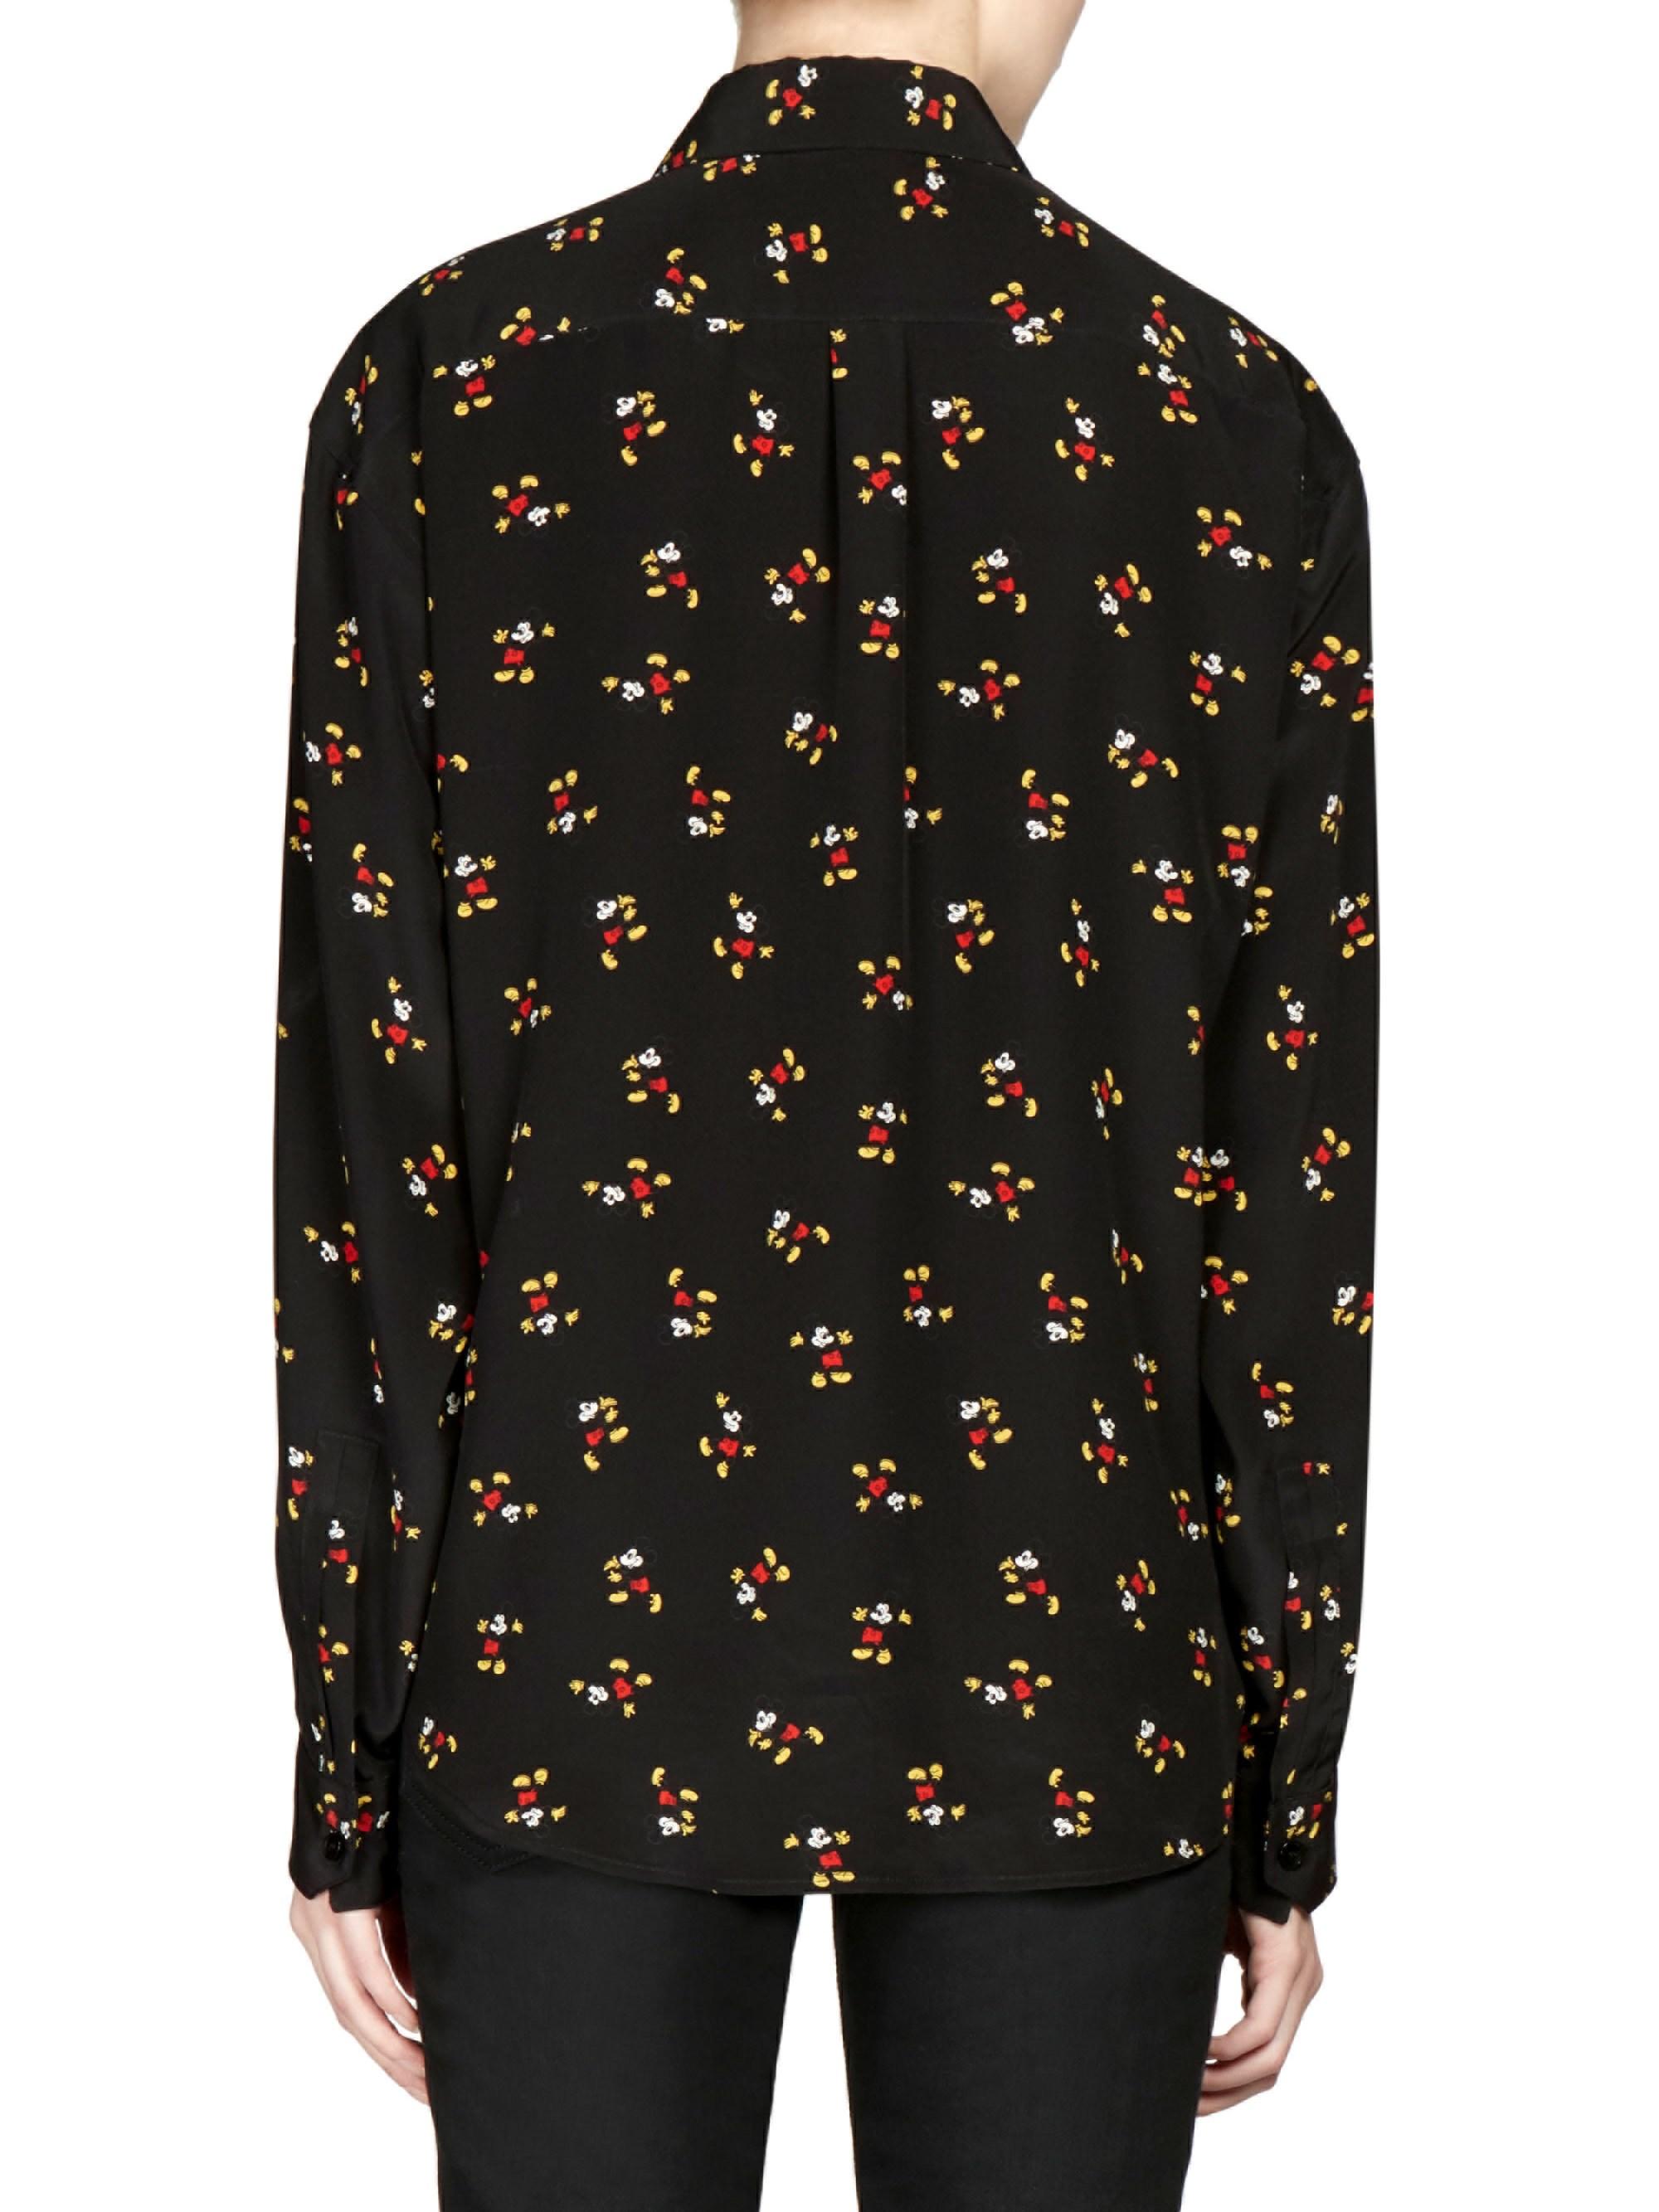 Saint Laurent Mickey Mouse Print Shirt in Black | Lyst